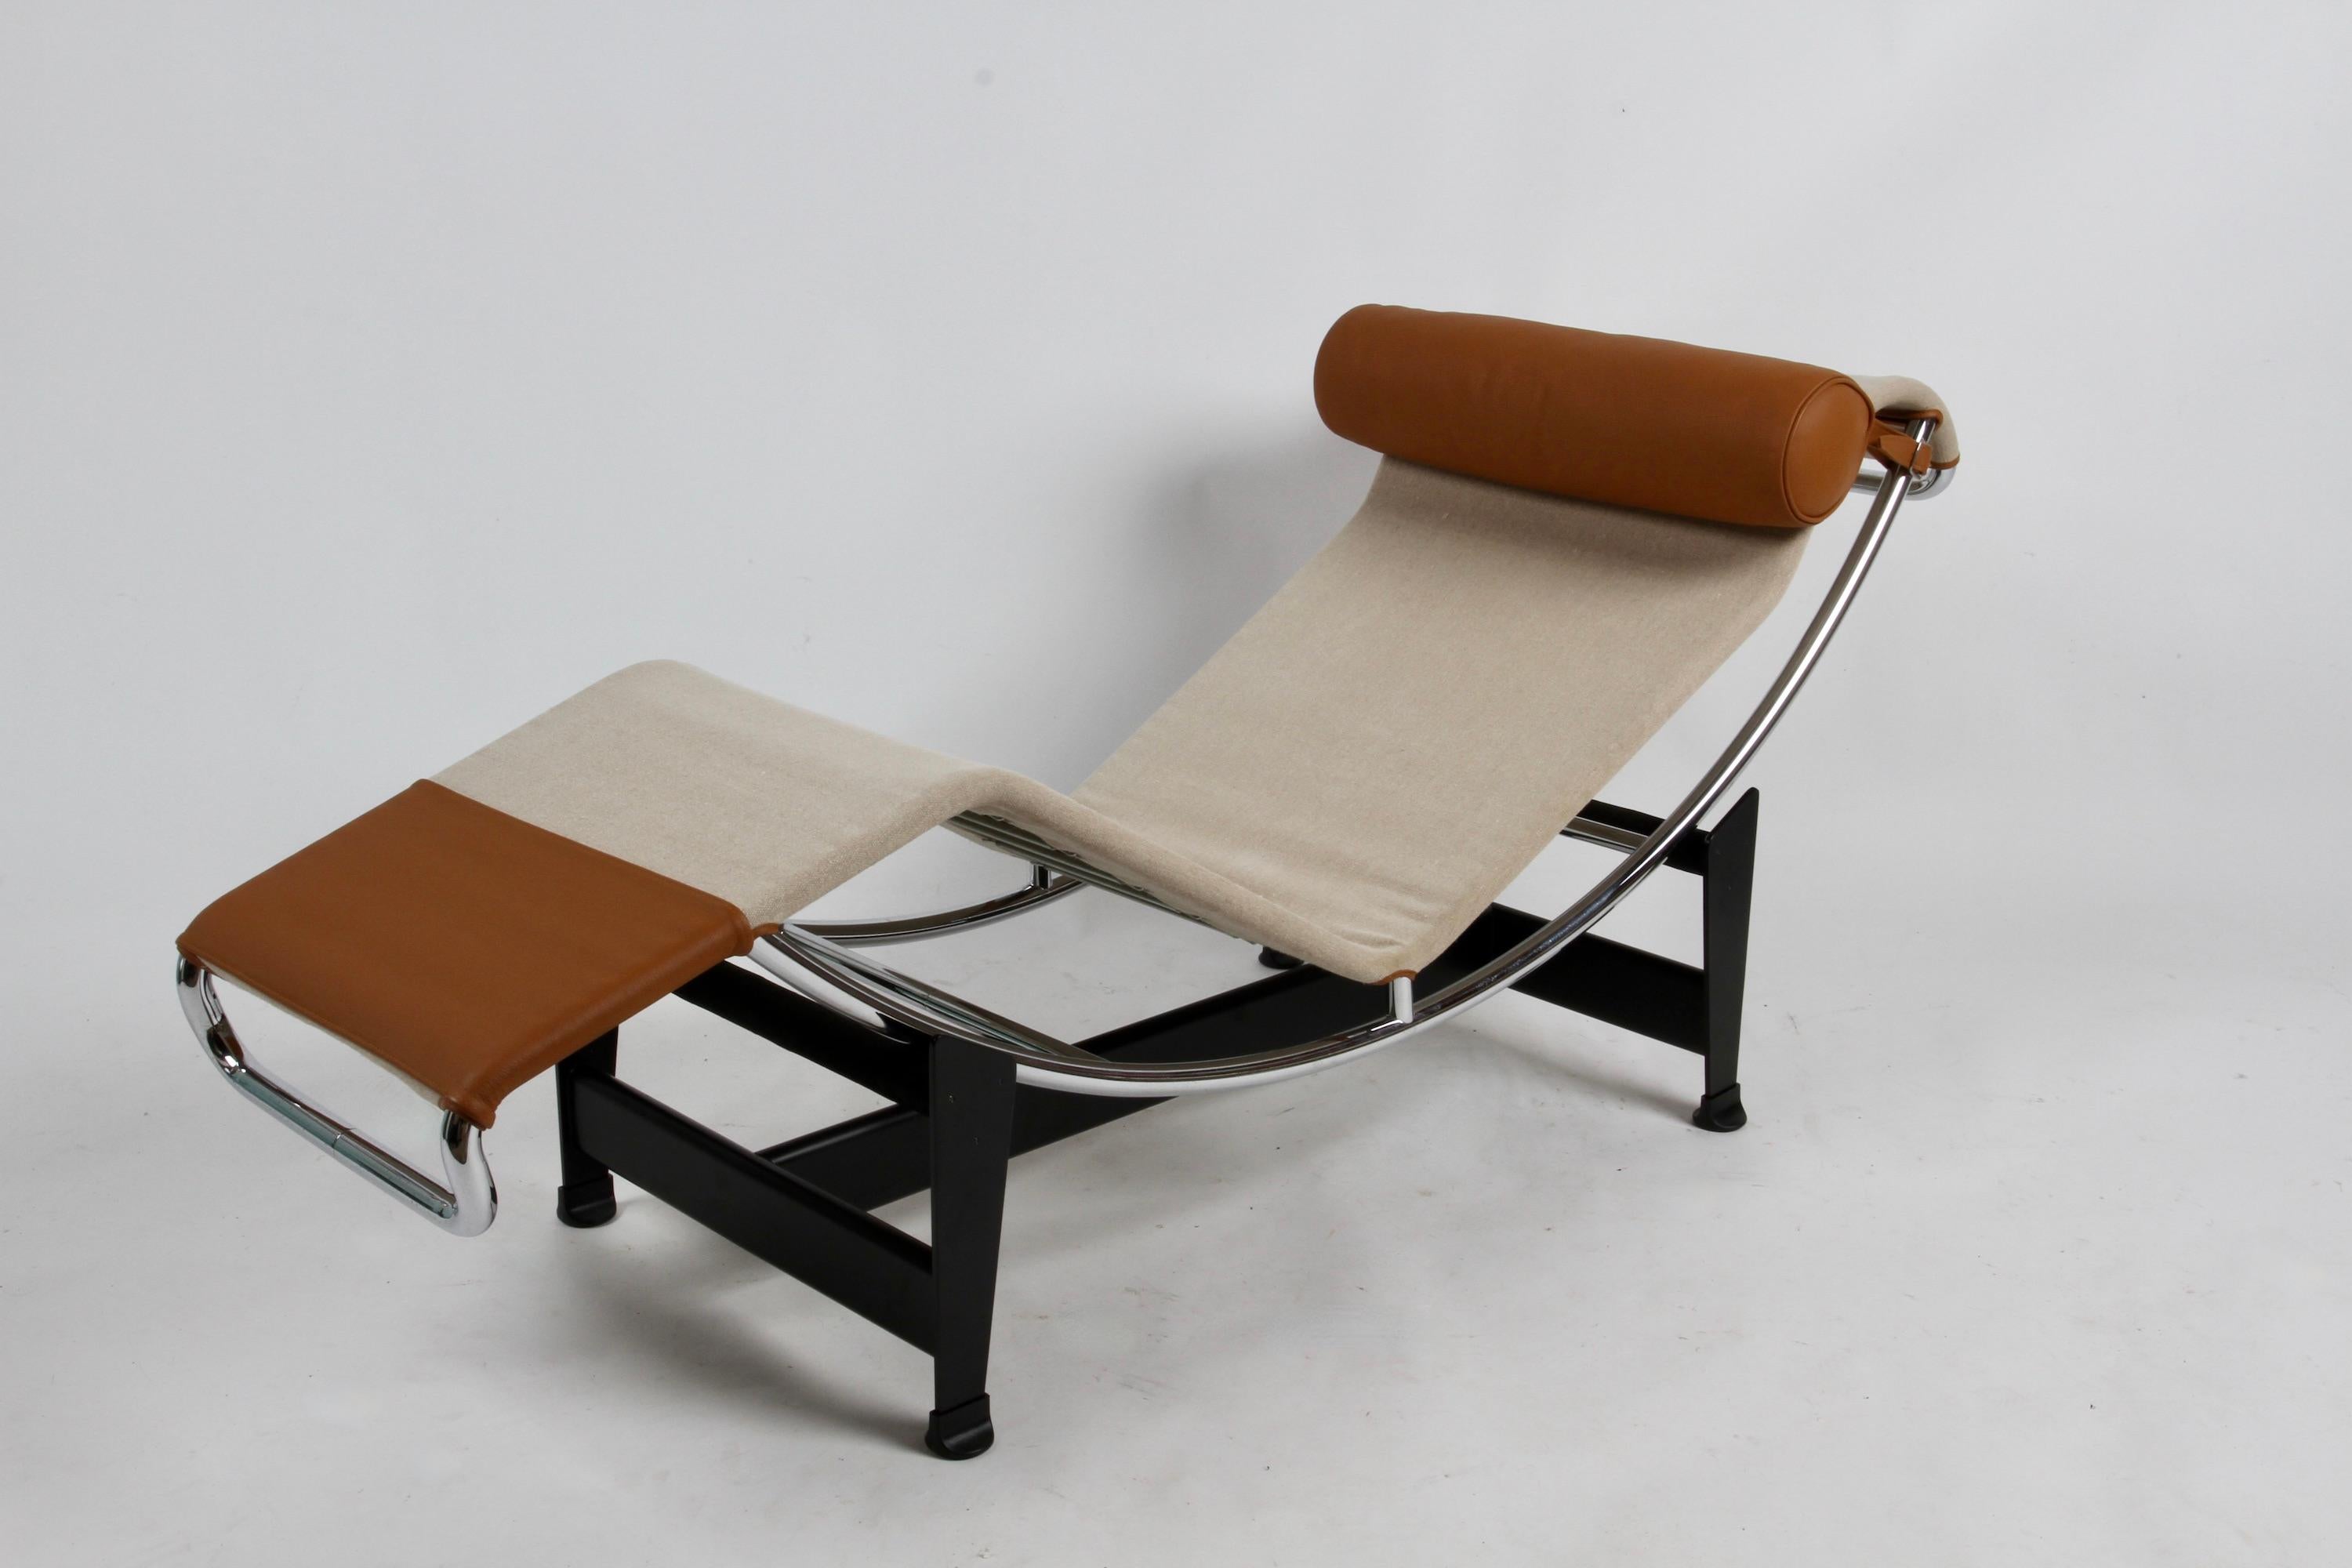 Lc4 Chaise Lounge Canvas & Leather, Charlotte Perriand & Le Corbusier, Cassina 2